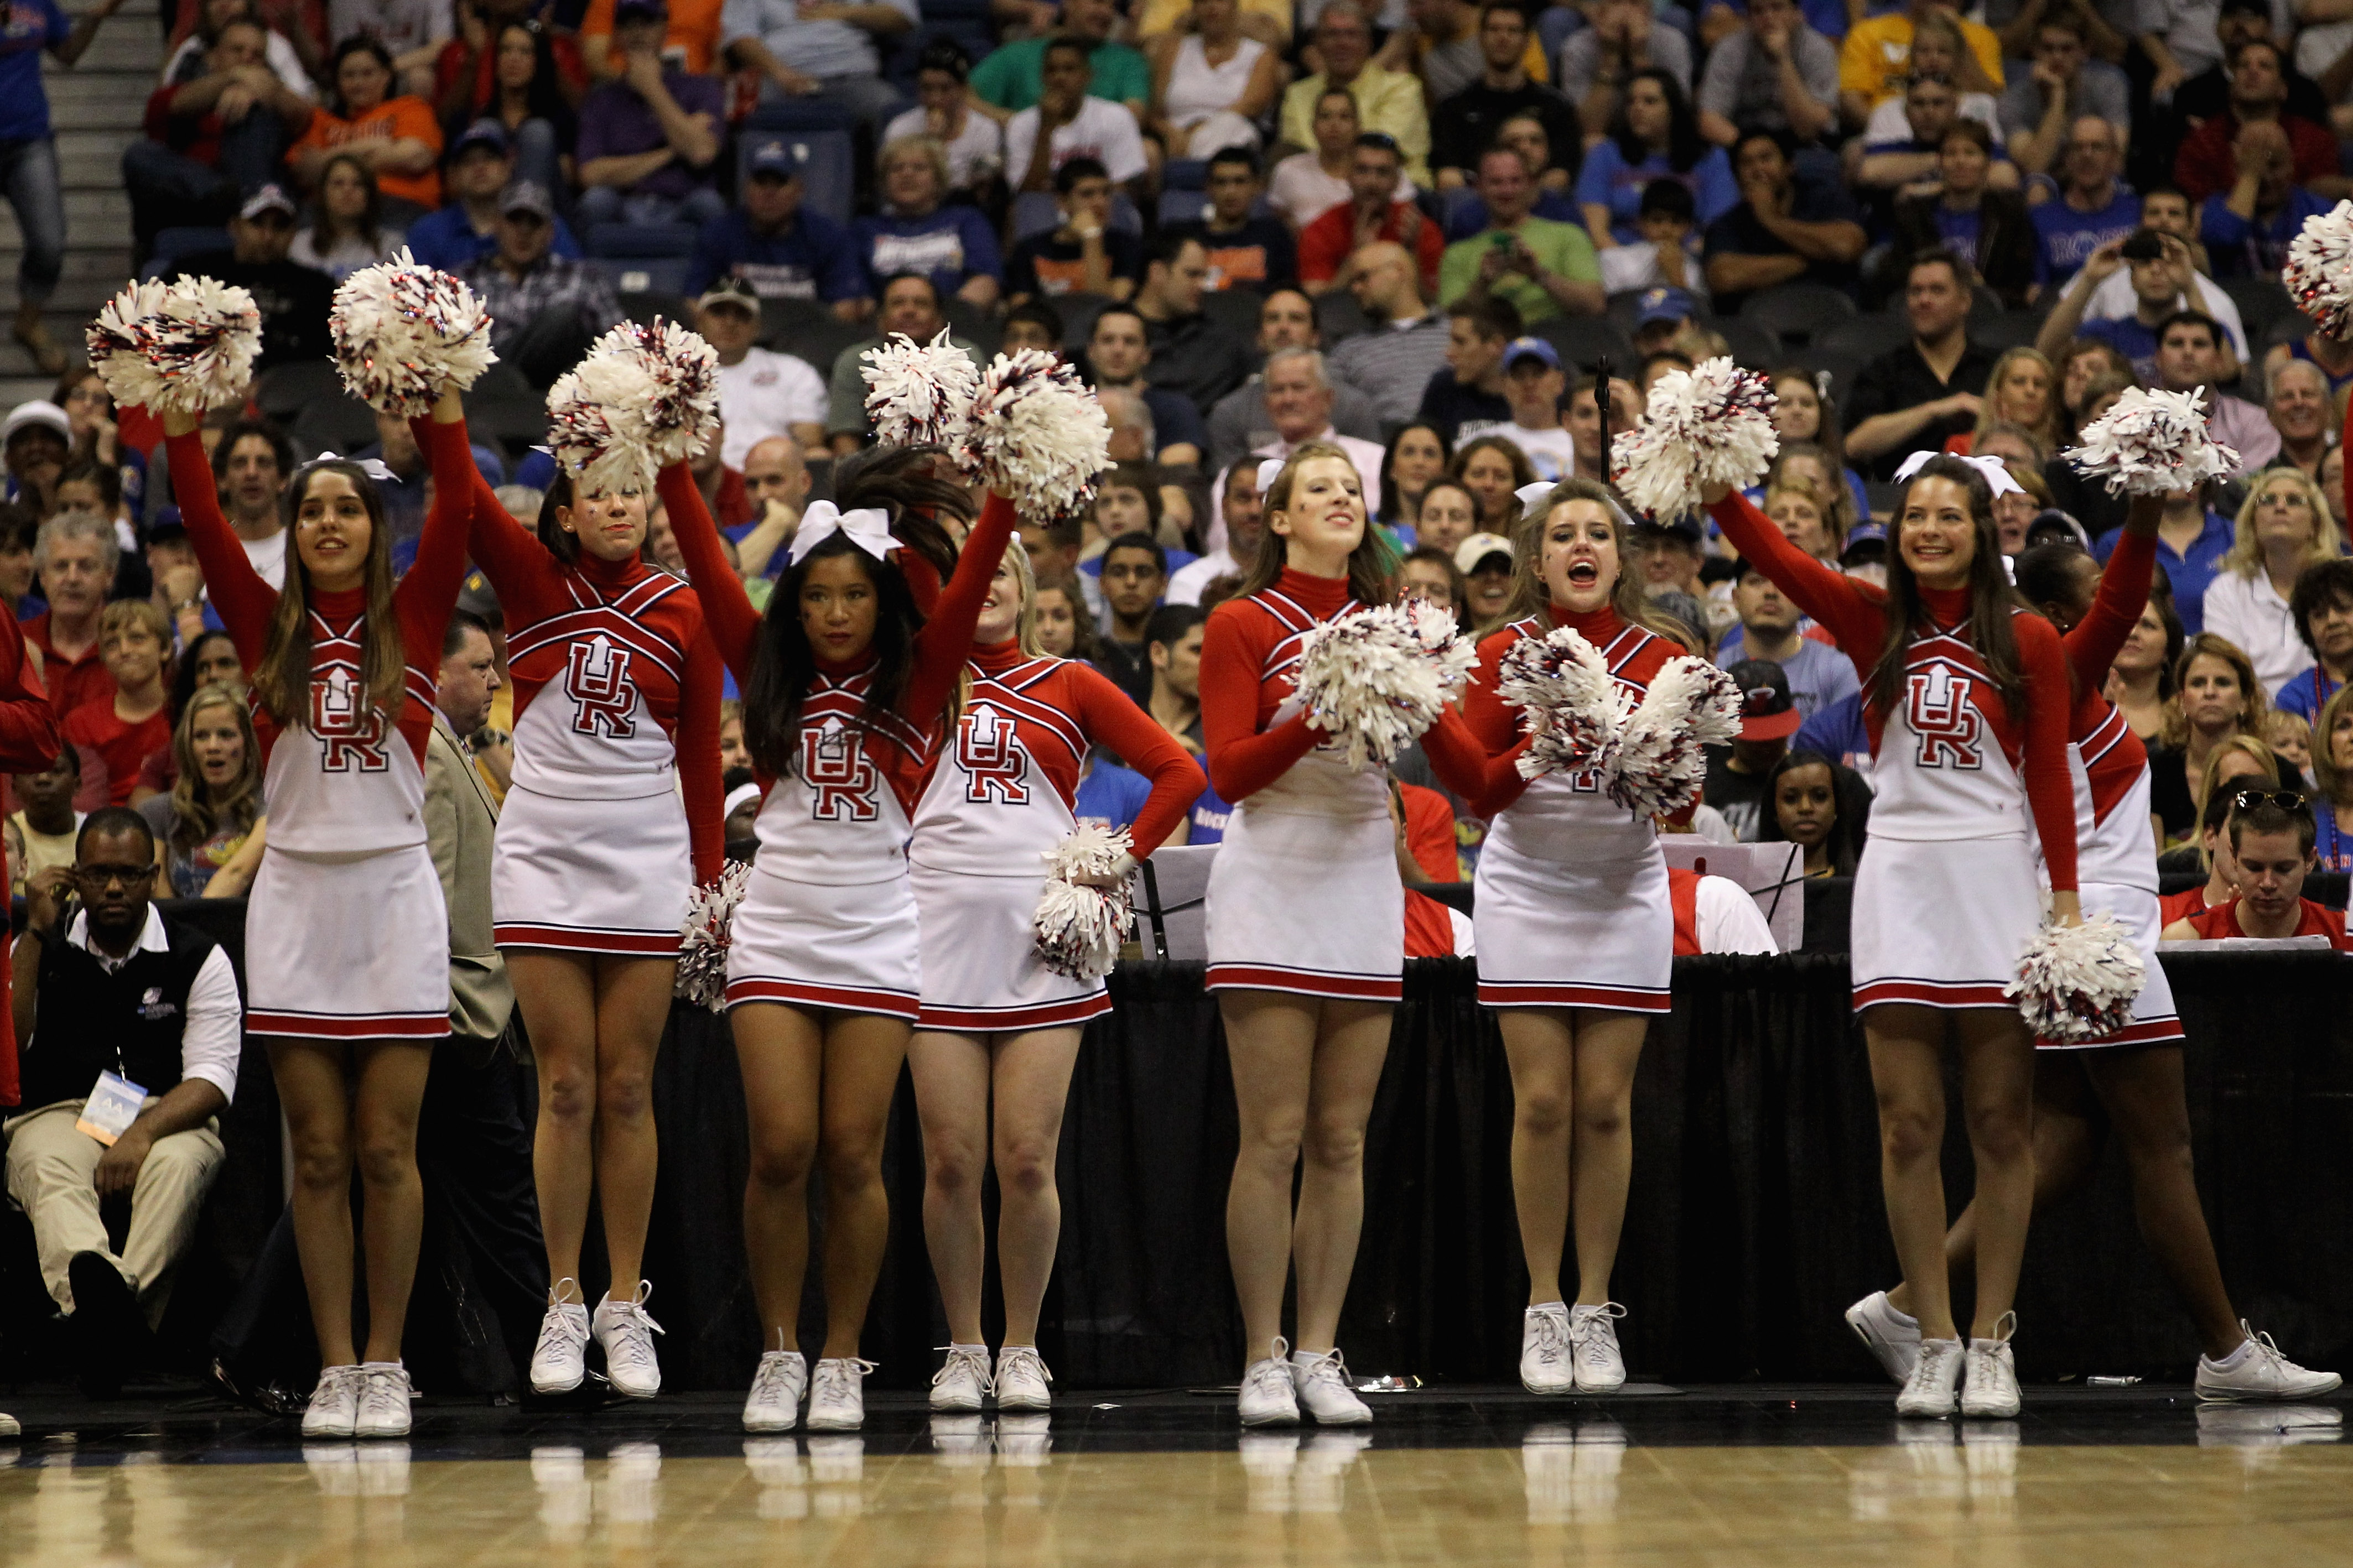 SAN ANTONIO, TX - MARCH 25:  The Richmond Spiders cheerleaders perform during the southwest regional of the 2011 NCAA men's basketball tournament against the Kansas Jayhawks at the Alamodome on March 25, 2011 in San Antonio, Texas.  (Photo by Ronald Marti